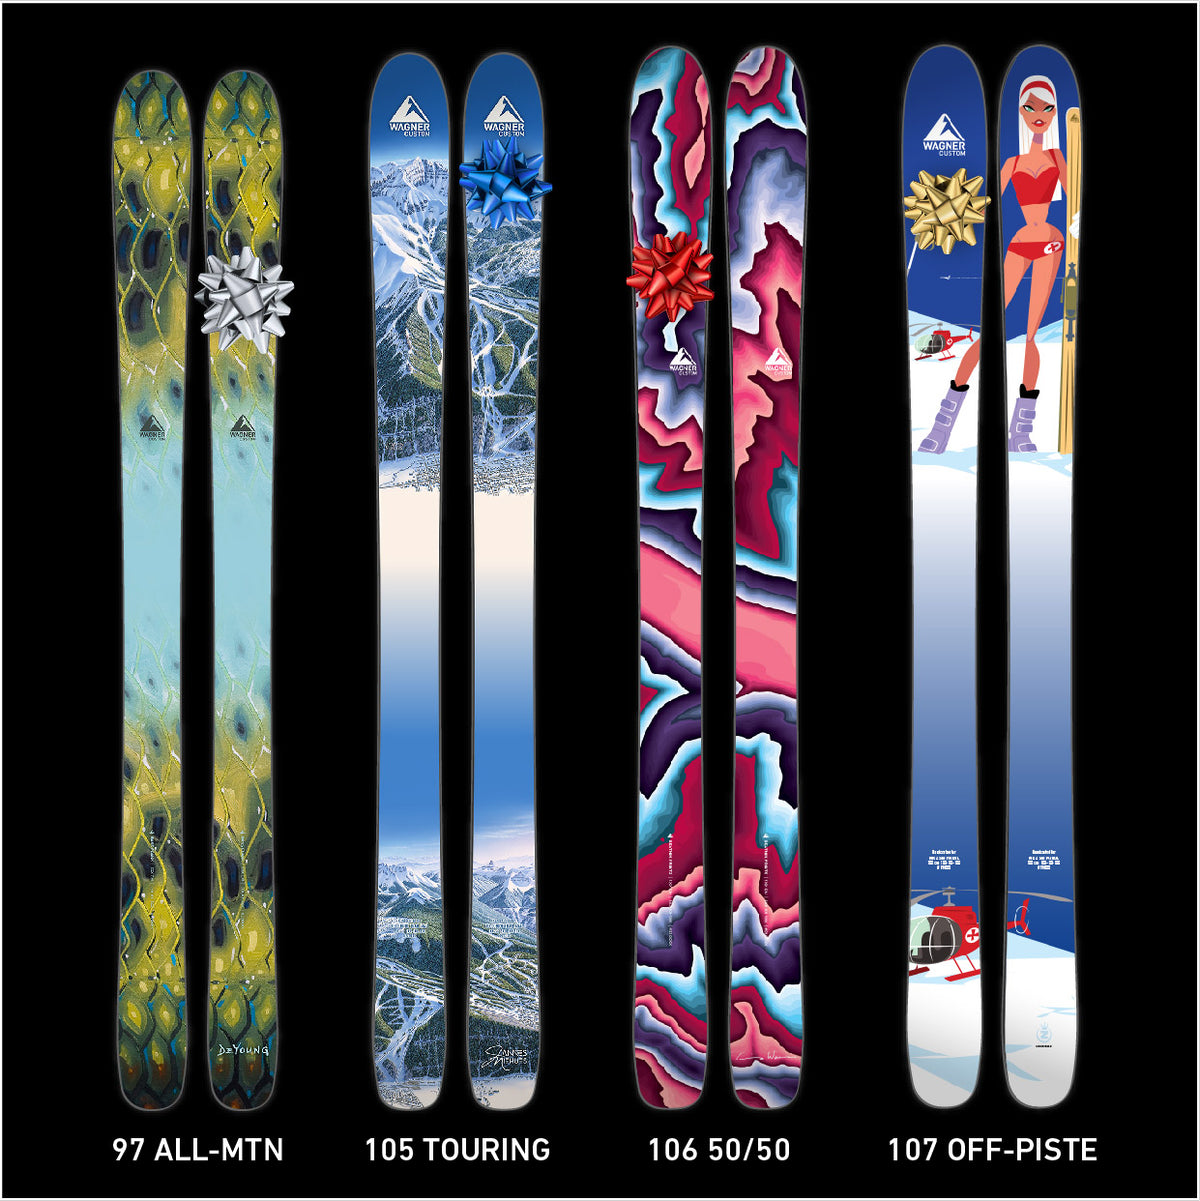 Factory Skis with Artist Series graphics